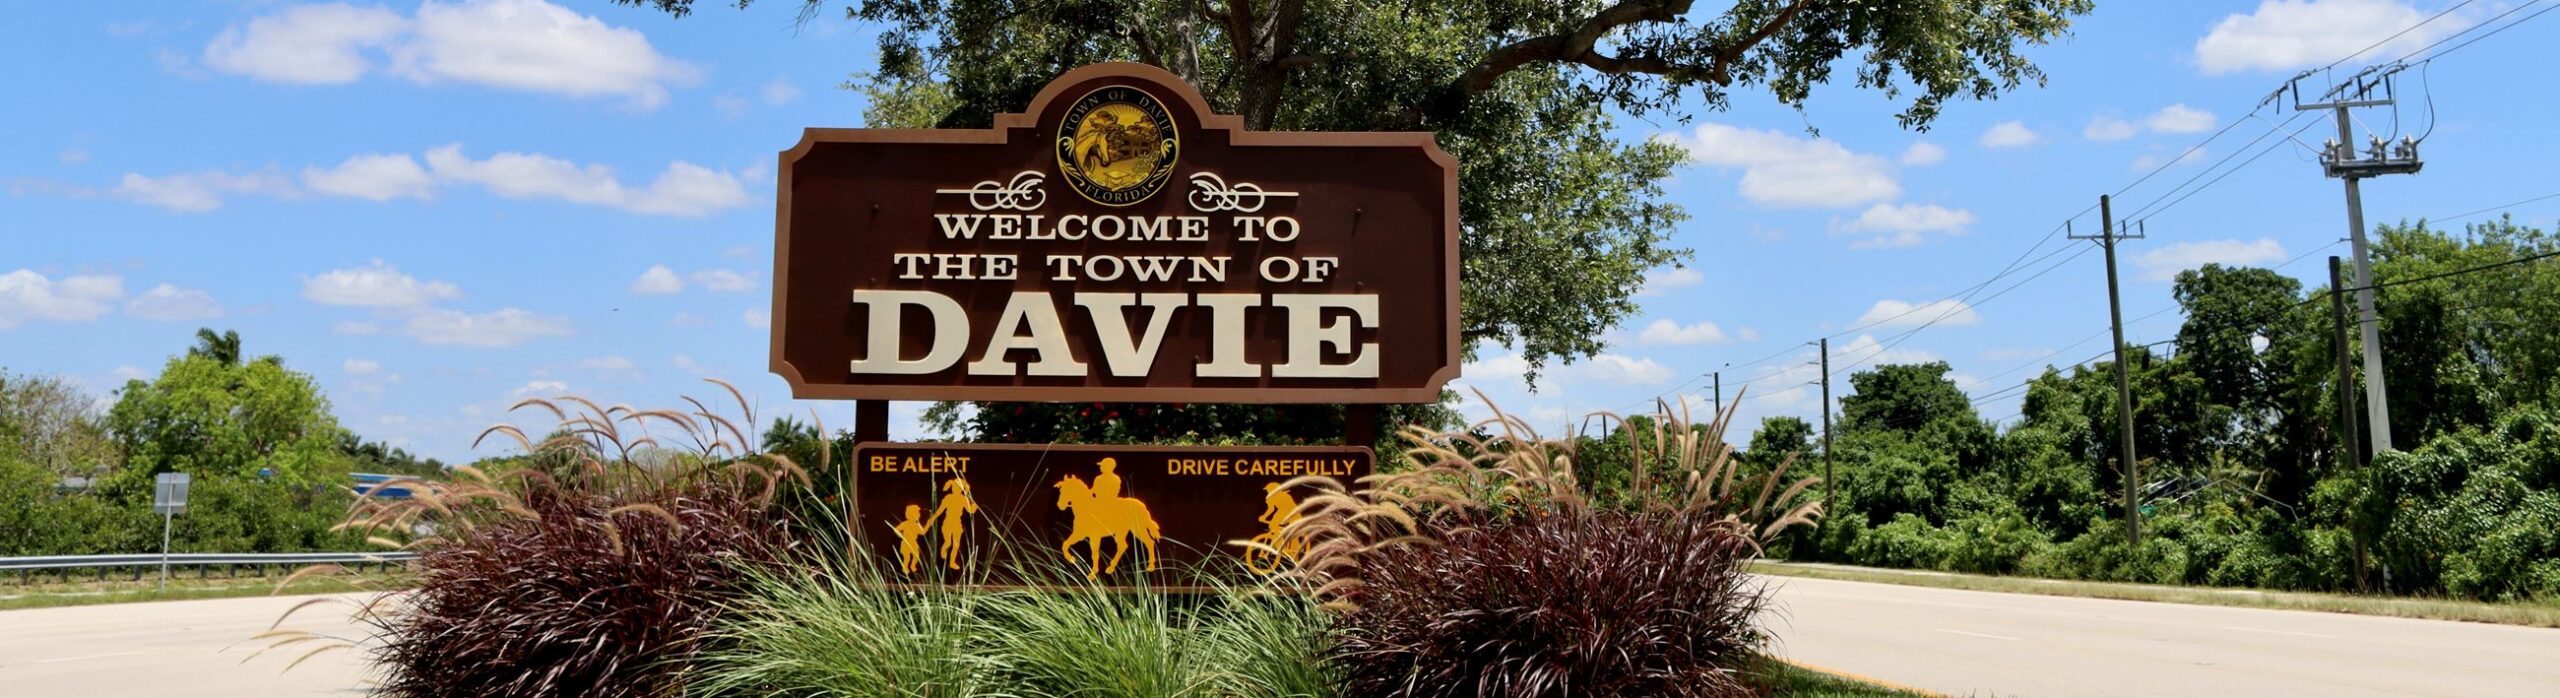 Hit-and-Runs in Davie Town, Florida